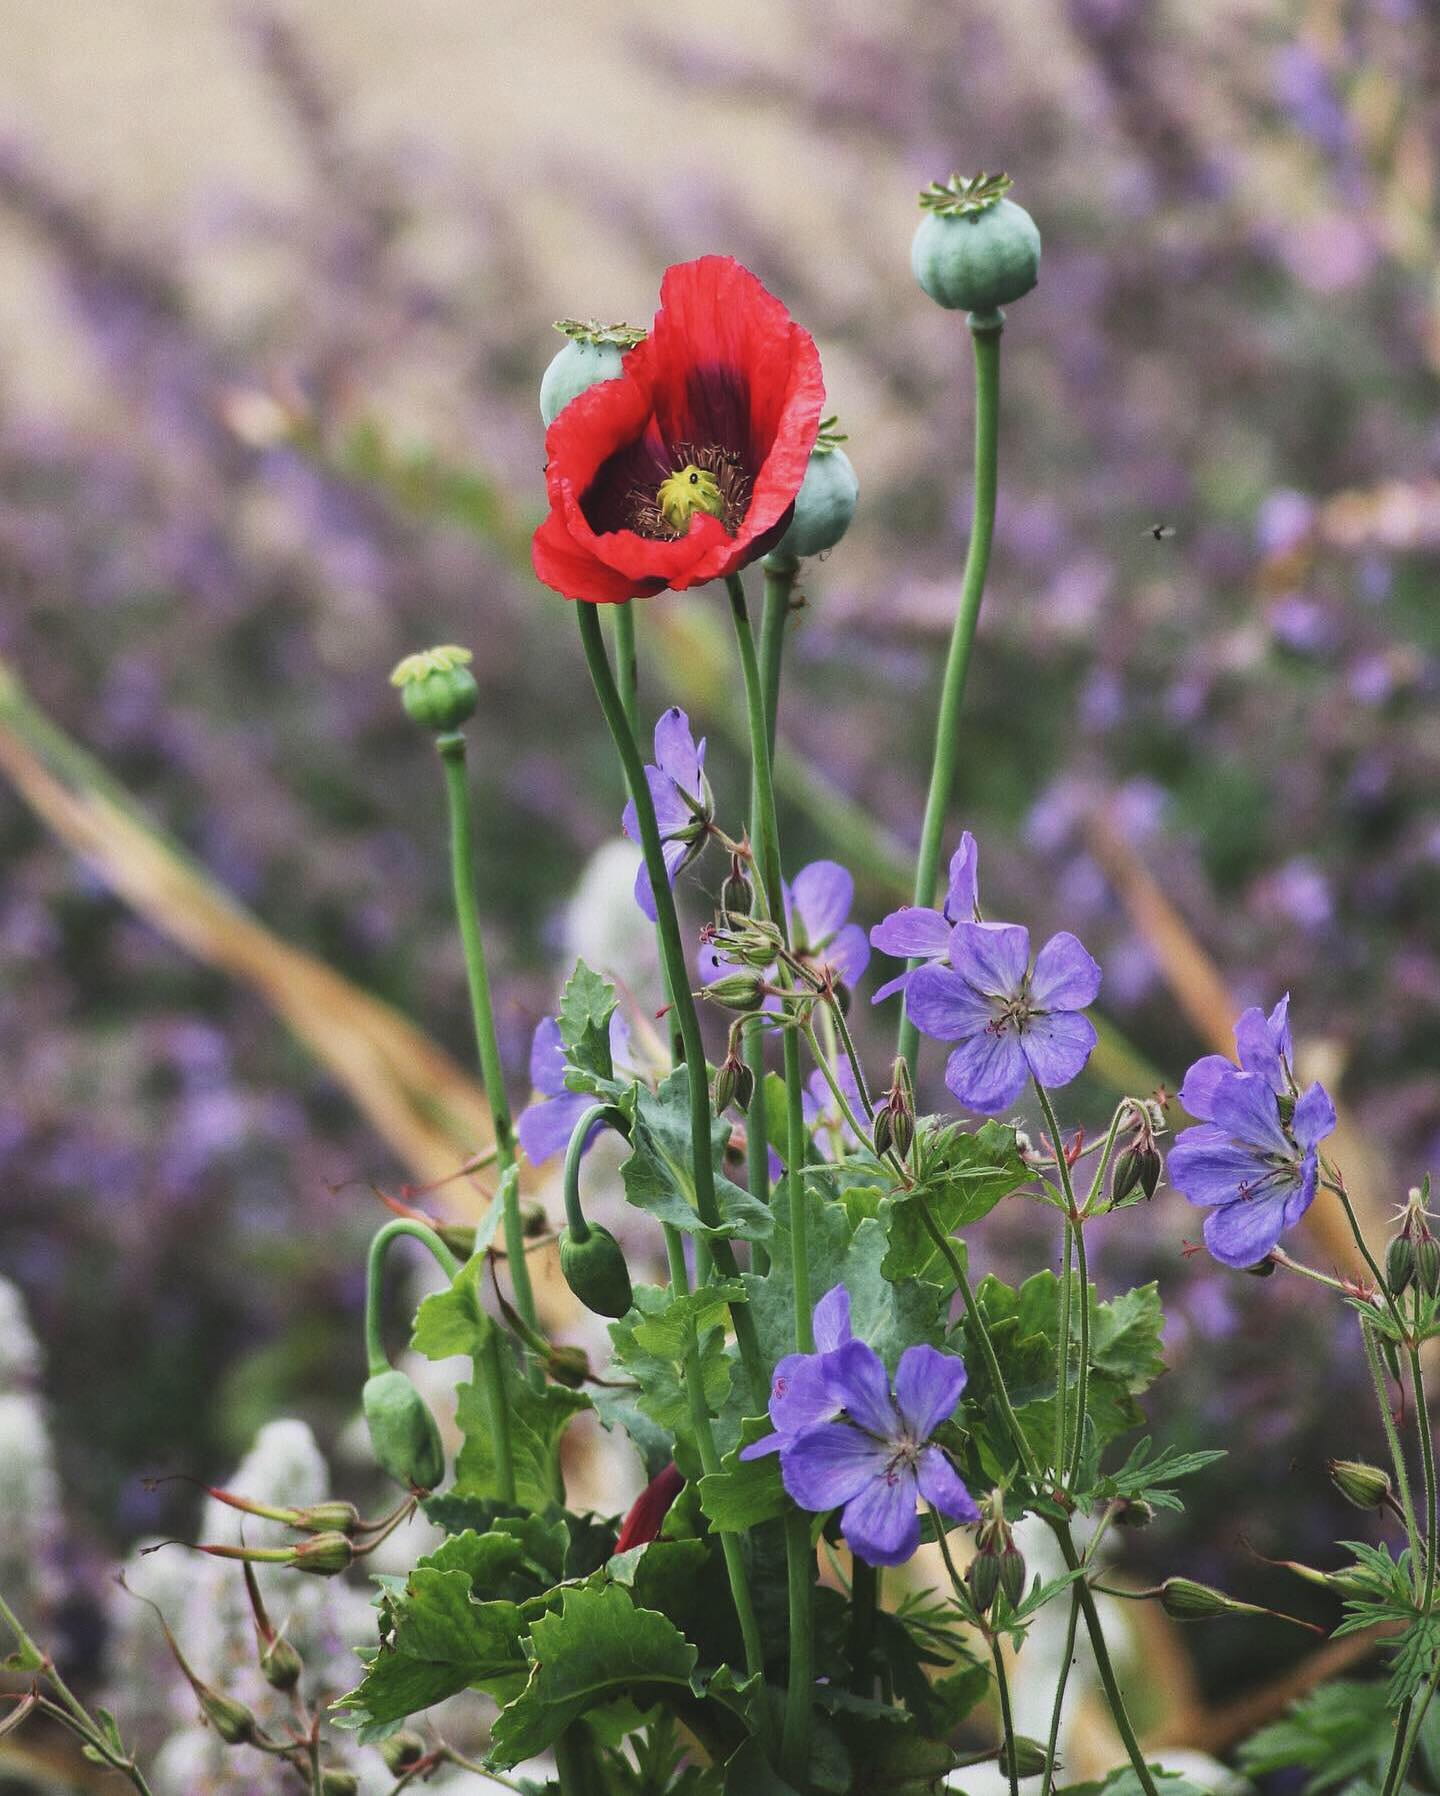 Image of some purple and red flowers